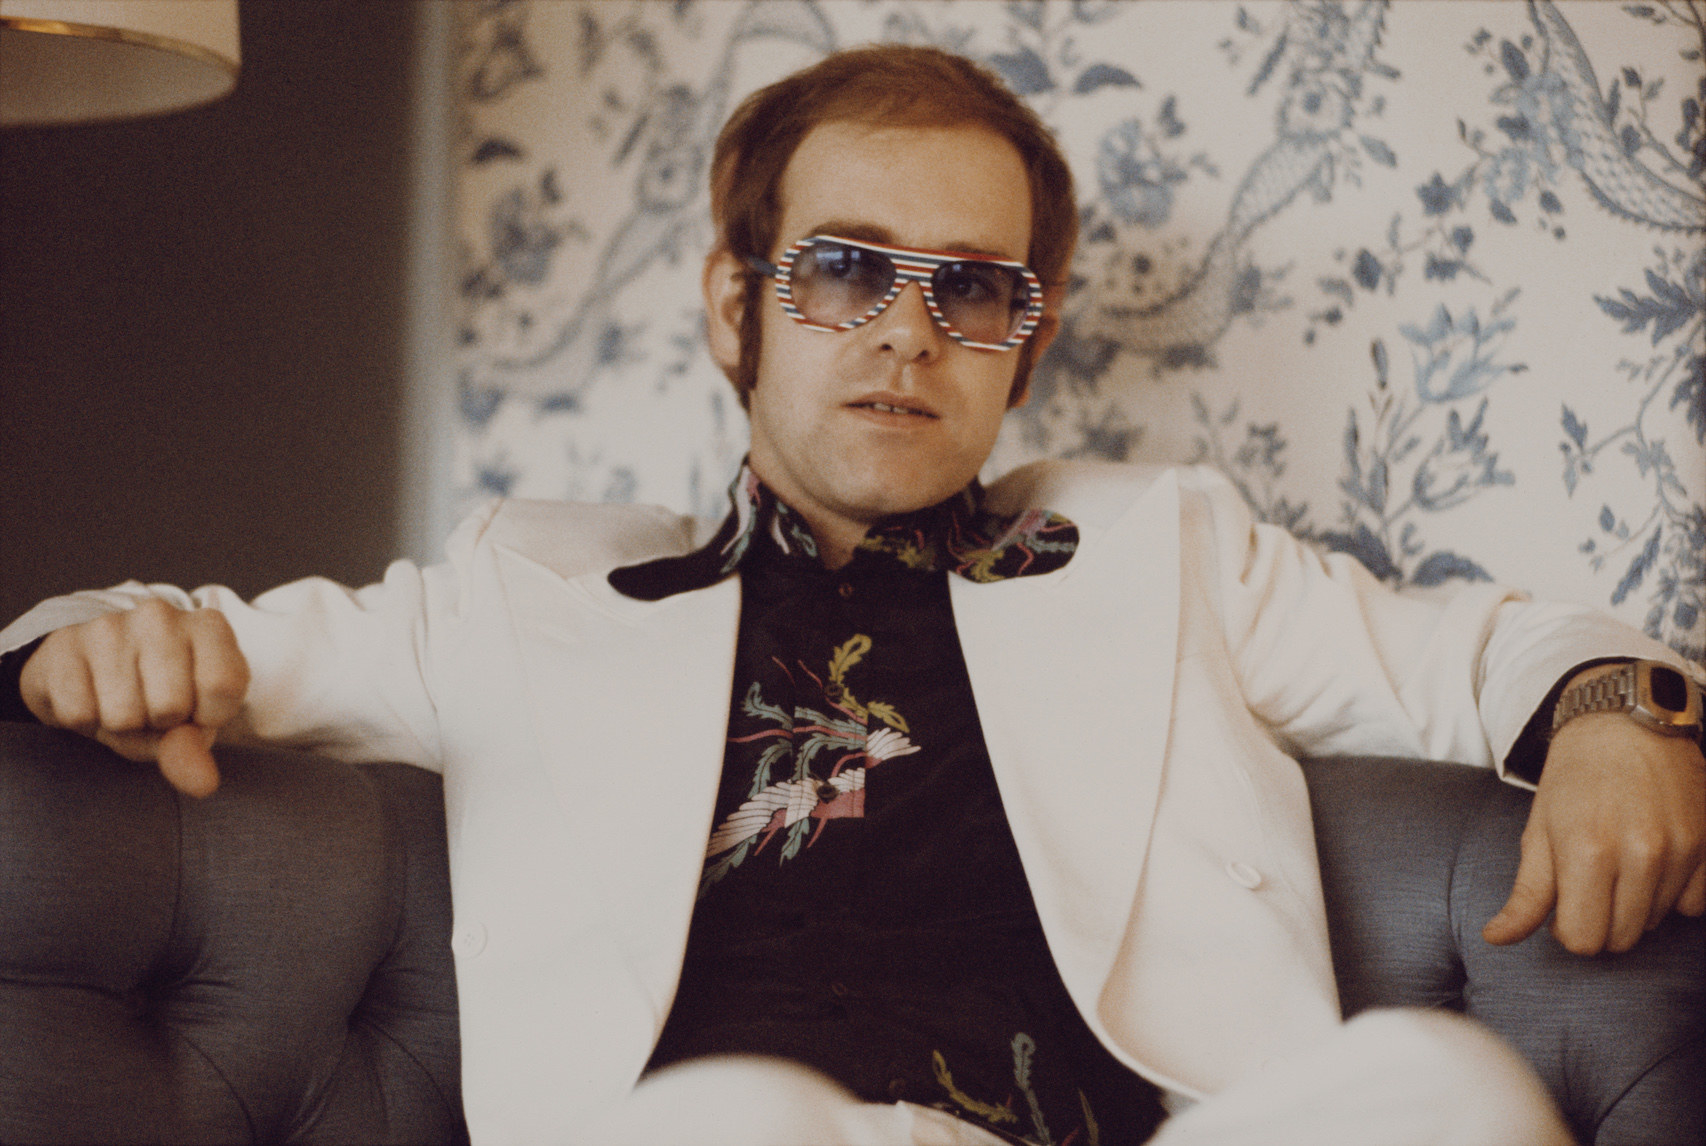 Elton John sitting on a couch